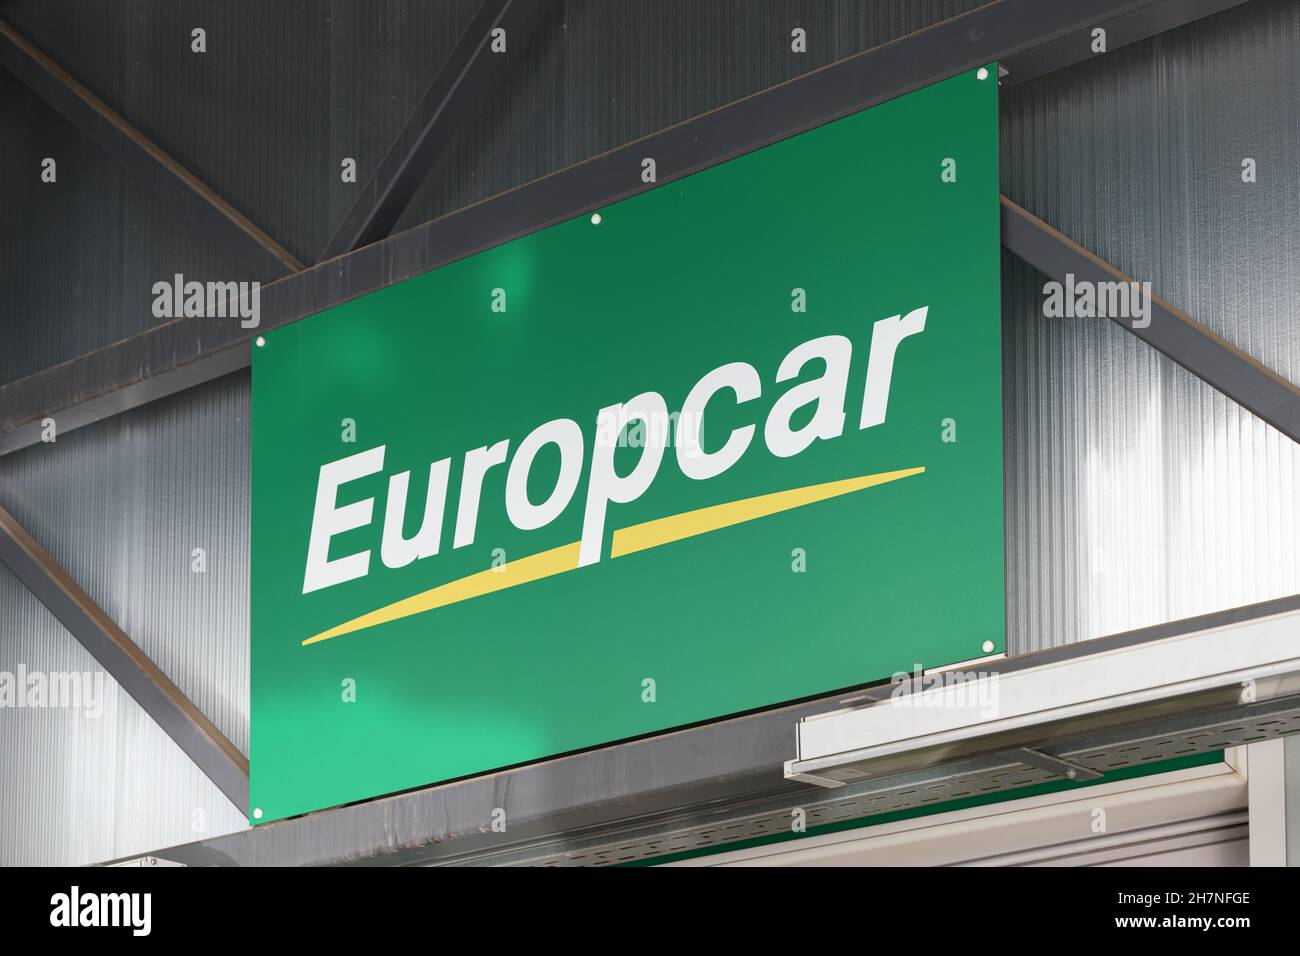 VALENCIA, SPAIN - NOVEMBER 23, 2021: Europcar is a French car rental company founded in 1949 Stock Photo